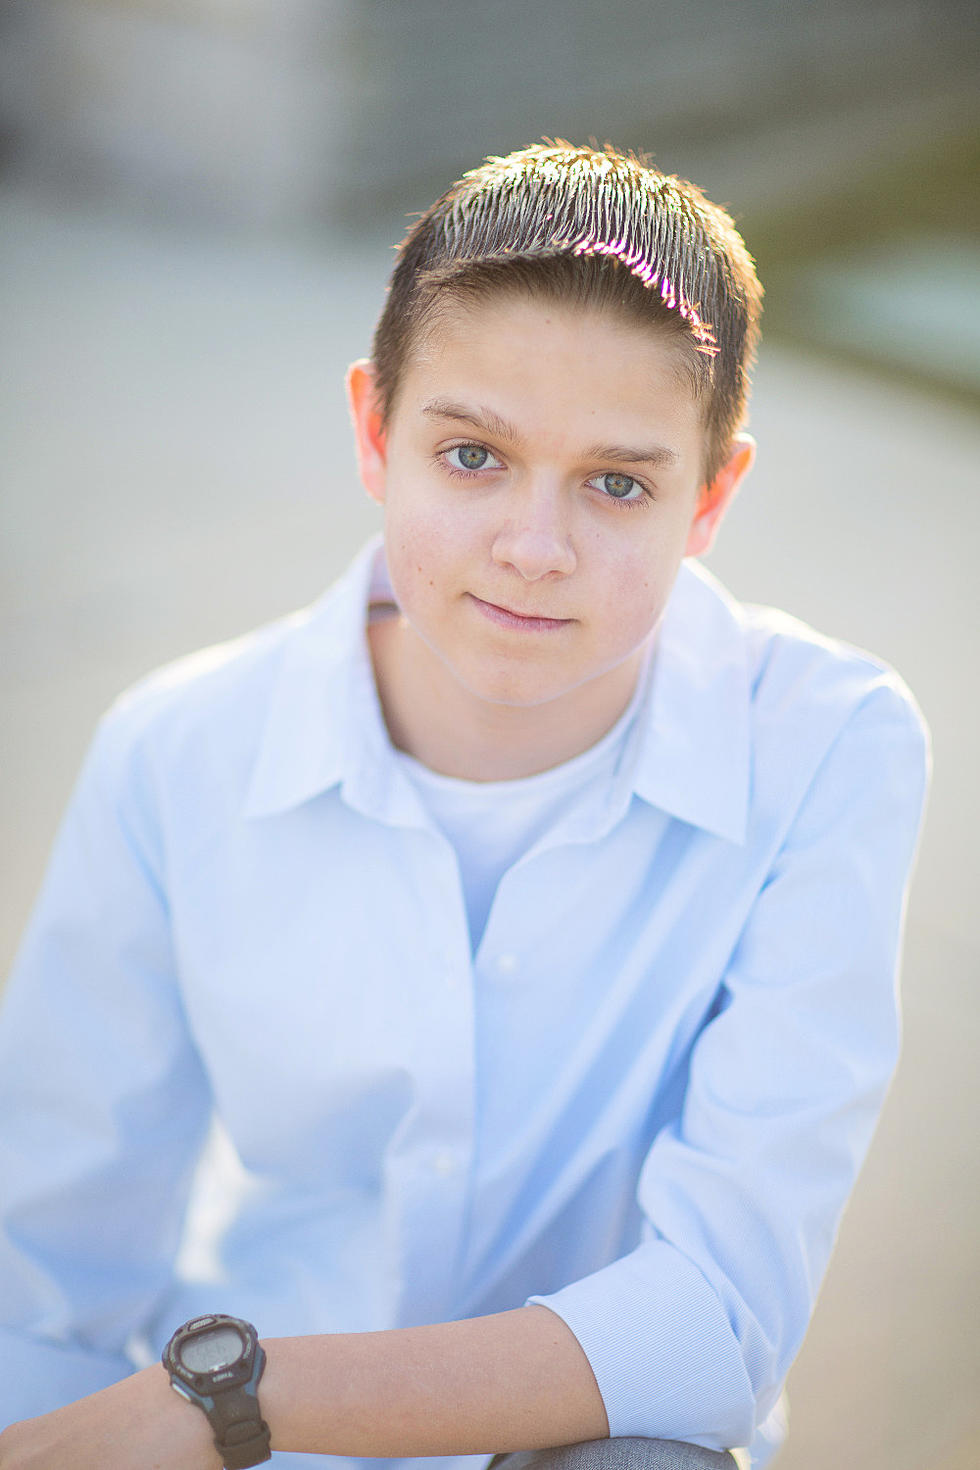 Richland Teen Dies After Courageous Three Year Cancer Fight